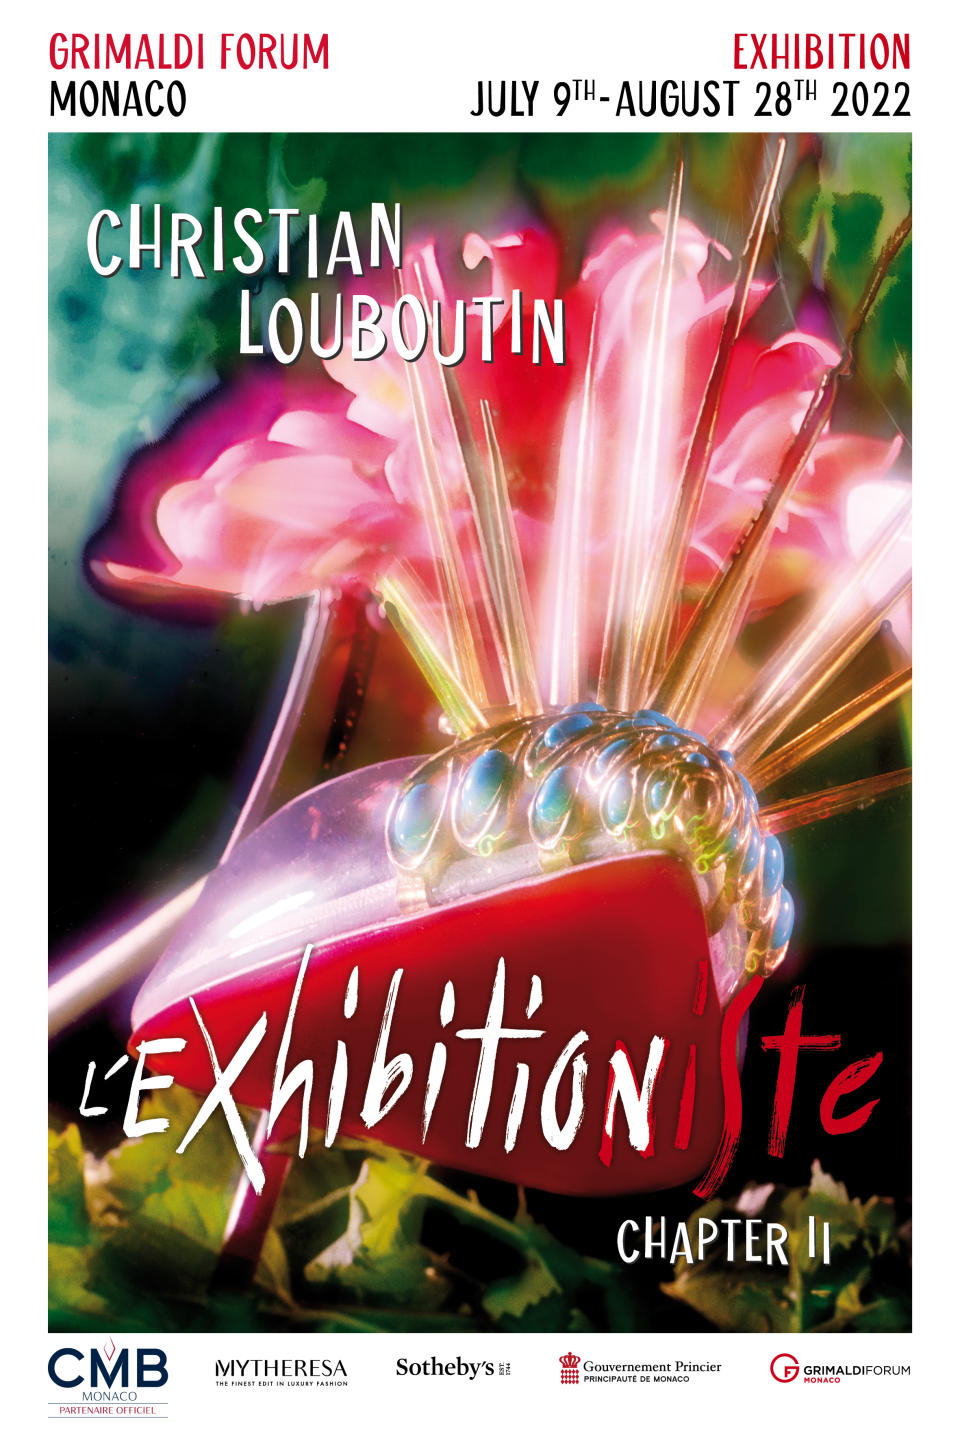 The poster for the Christian Louboutin exhibition in Monaco. - Credit: Courtesy of Christian Louboutin